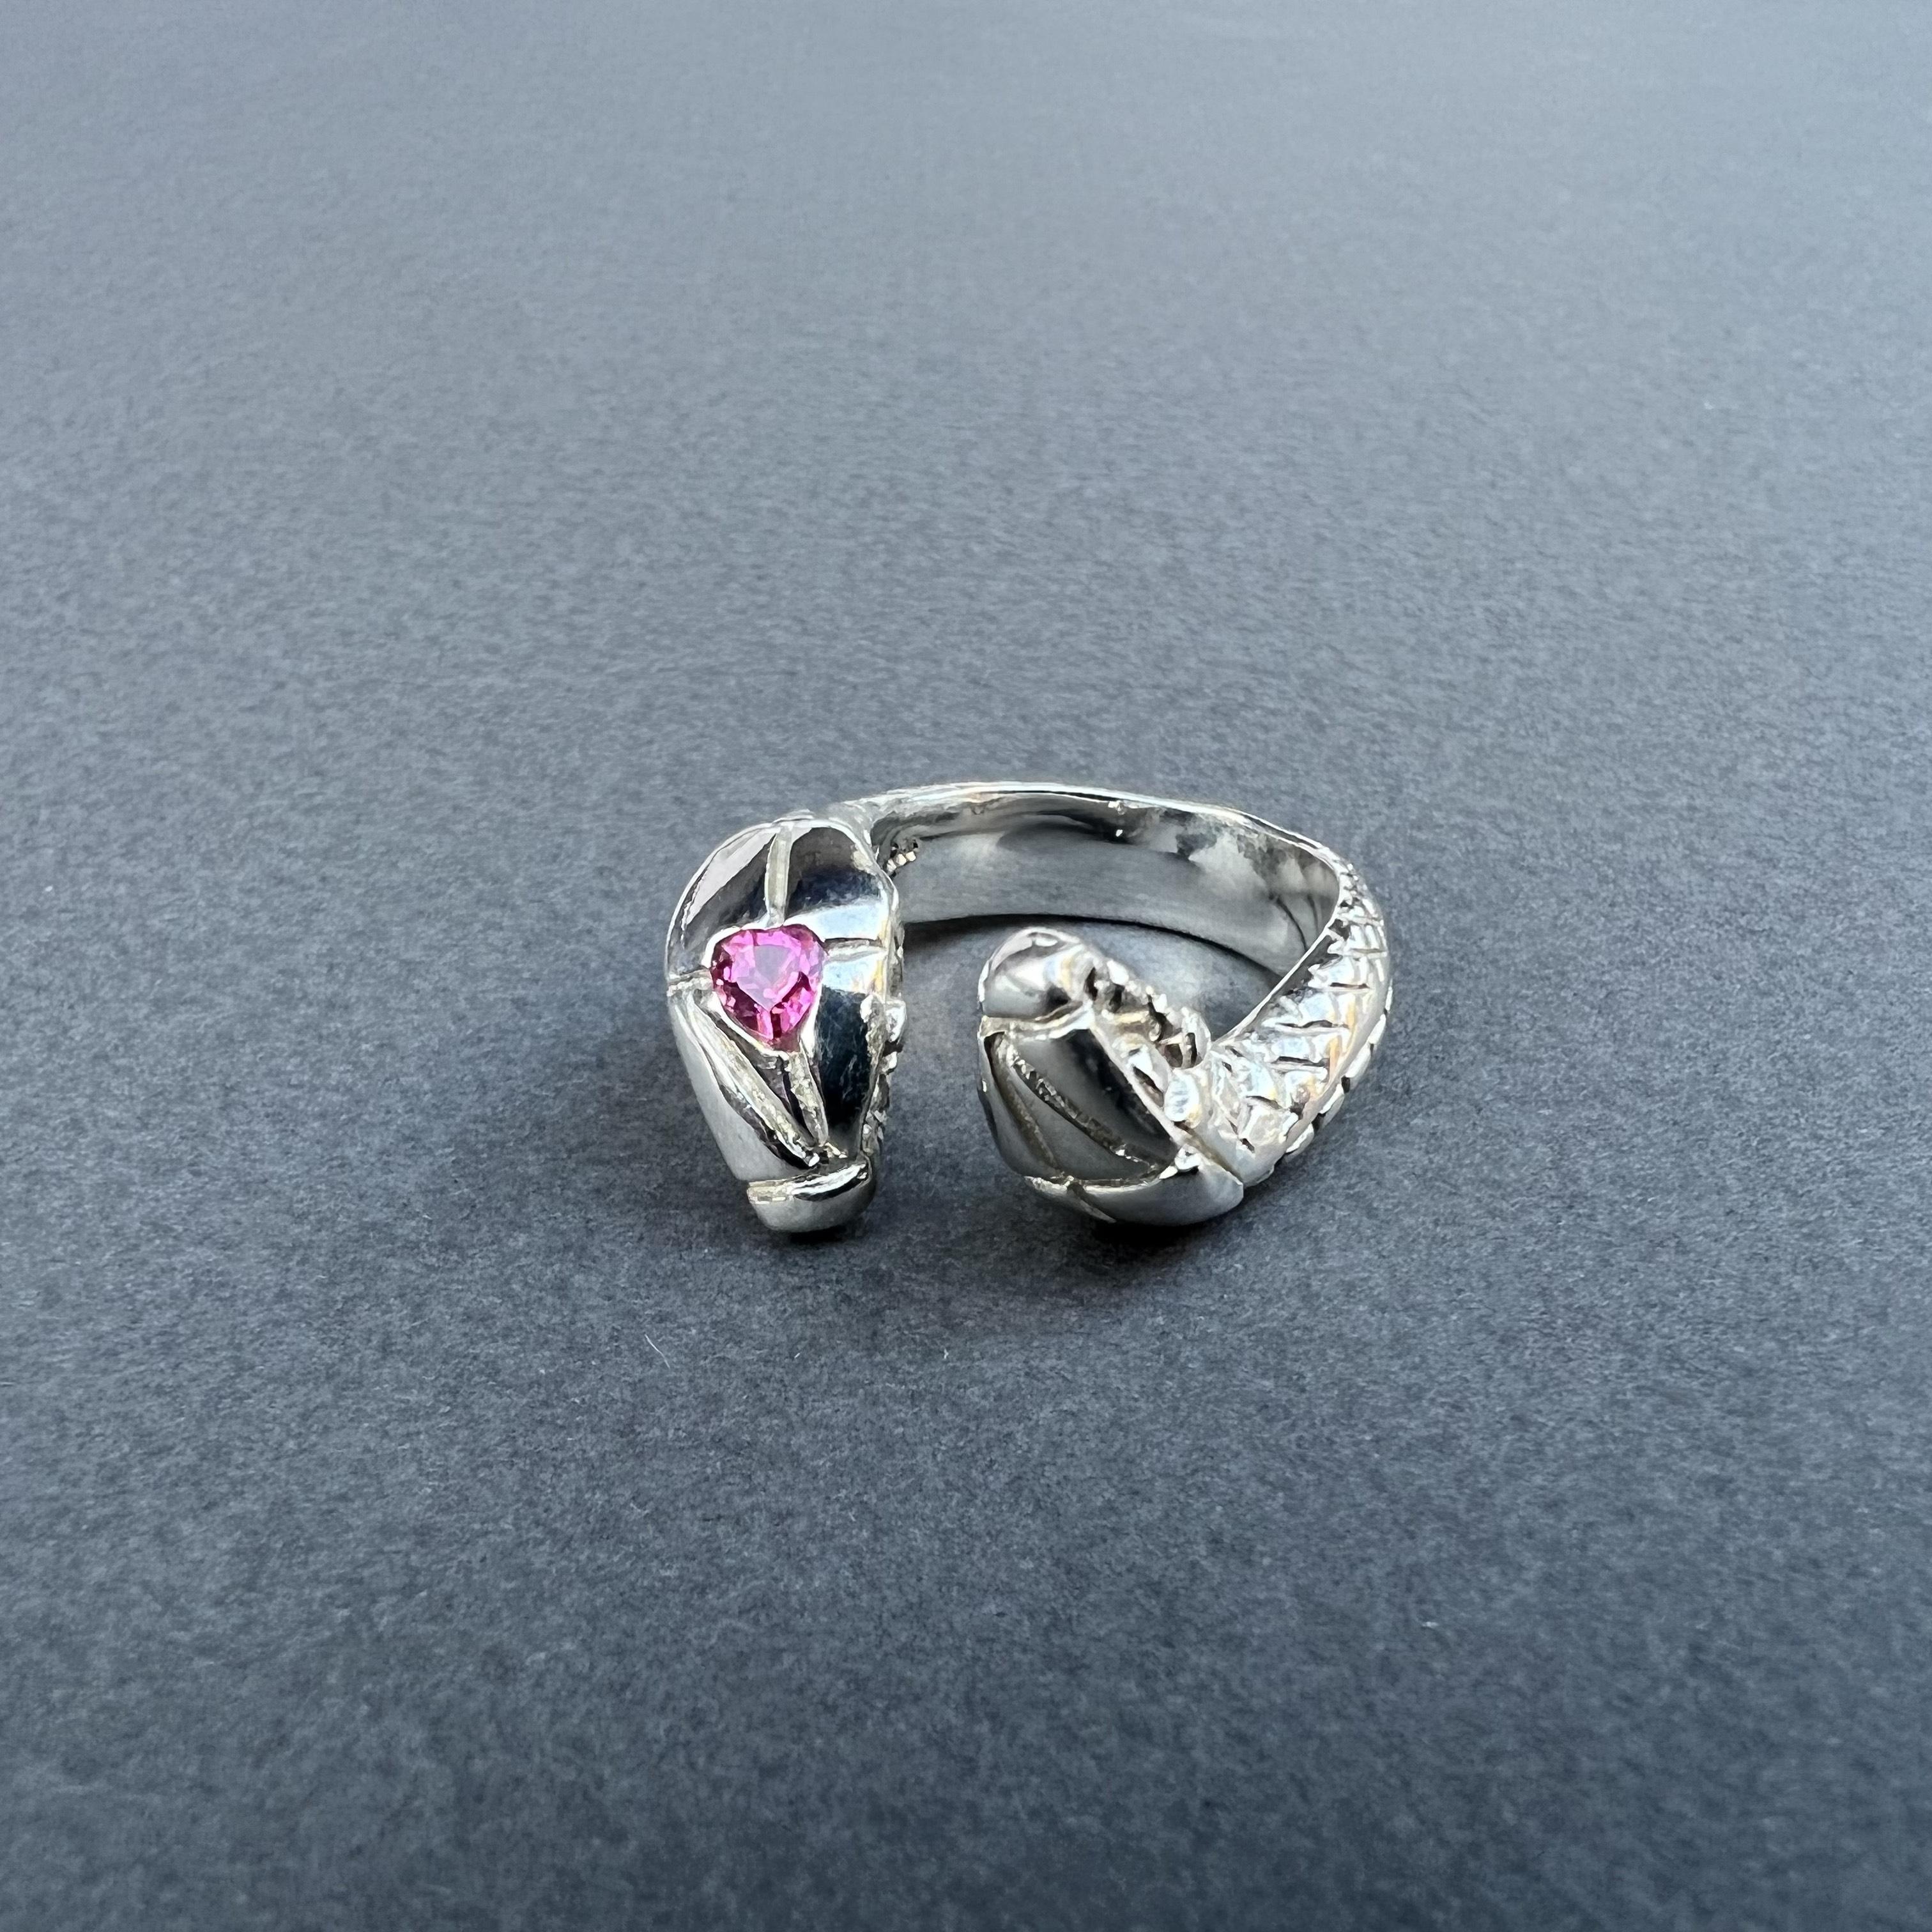 Animal Jewelry Heart Pink Sapphire Snake Ring Cocktail Ring J Dauphin

This ring has one large  Heart Pink Sapphire on the head of one snake. Its a great gift as it is adjustable - and you can use on any finger and just squeeze it on your